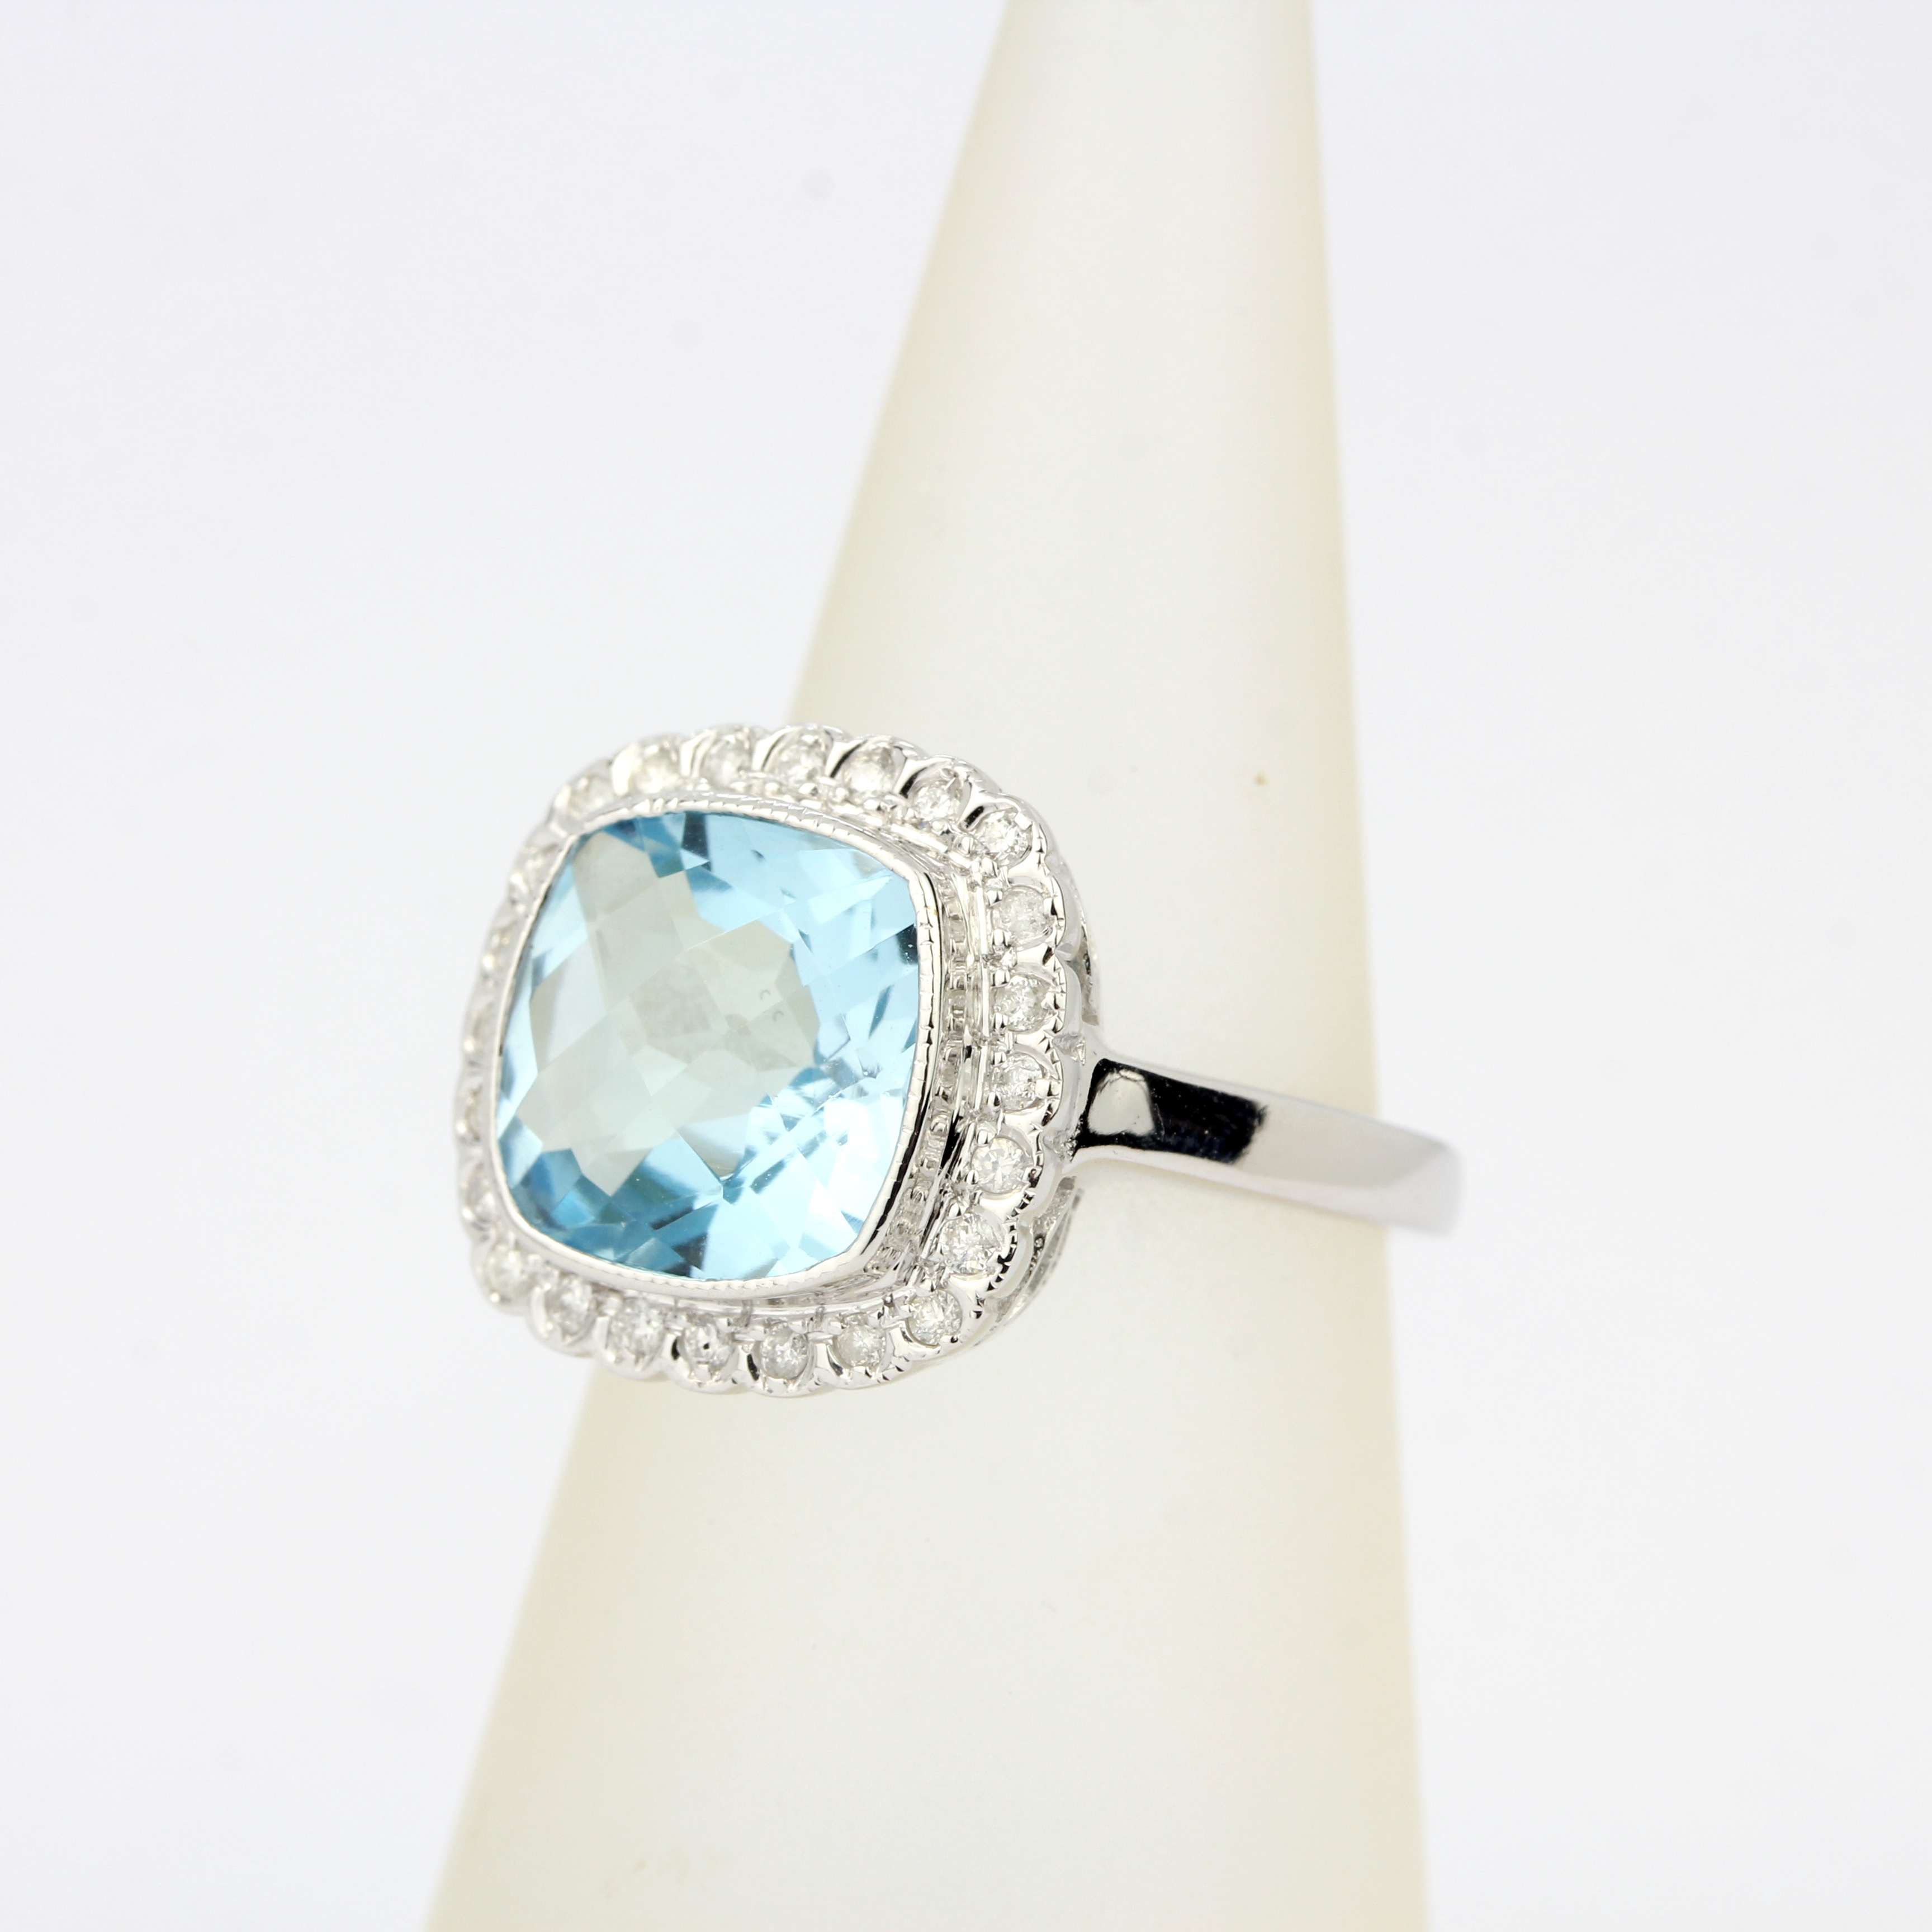 A 9ct white gold ring set with a checker board aquamarine and diamonds, ring size L. - Image 2 of 4